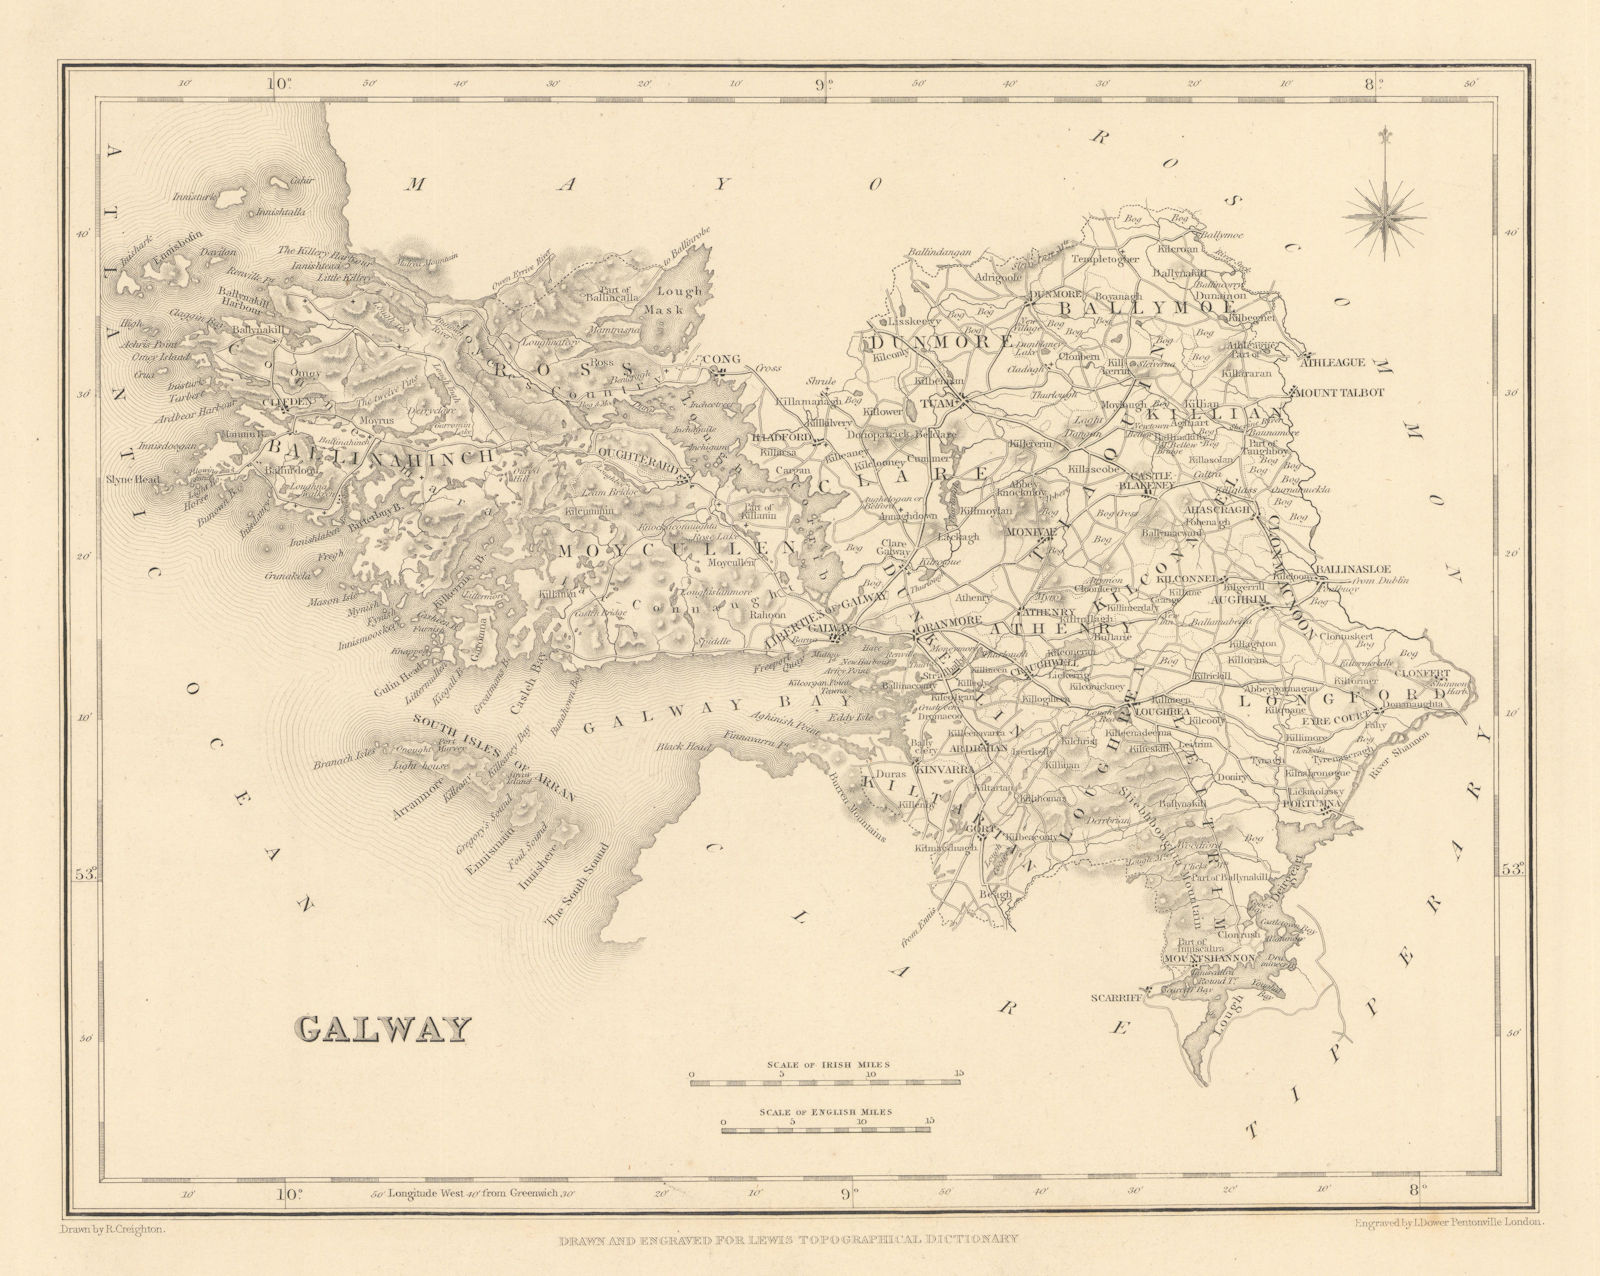 COUNTY GALWAY antique map for LEWIS by CREIGHTON & DOWER - Ireland 1837